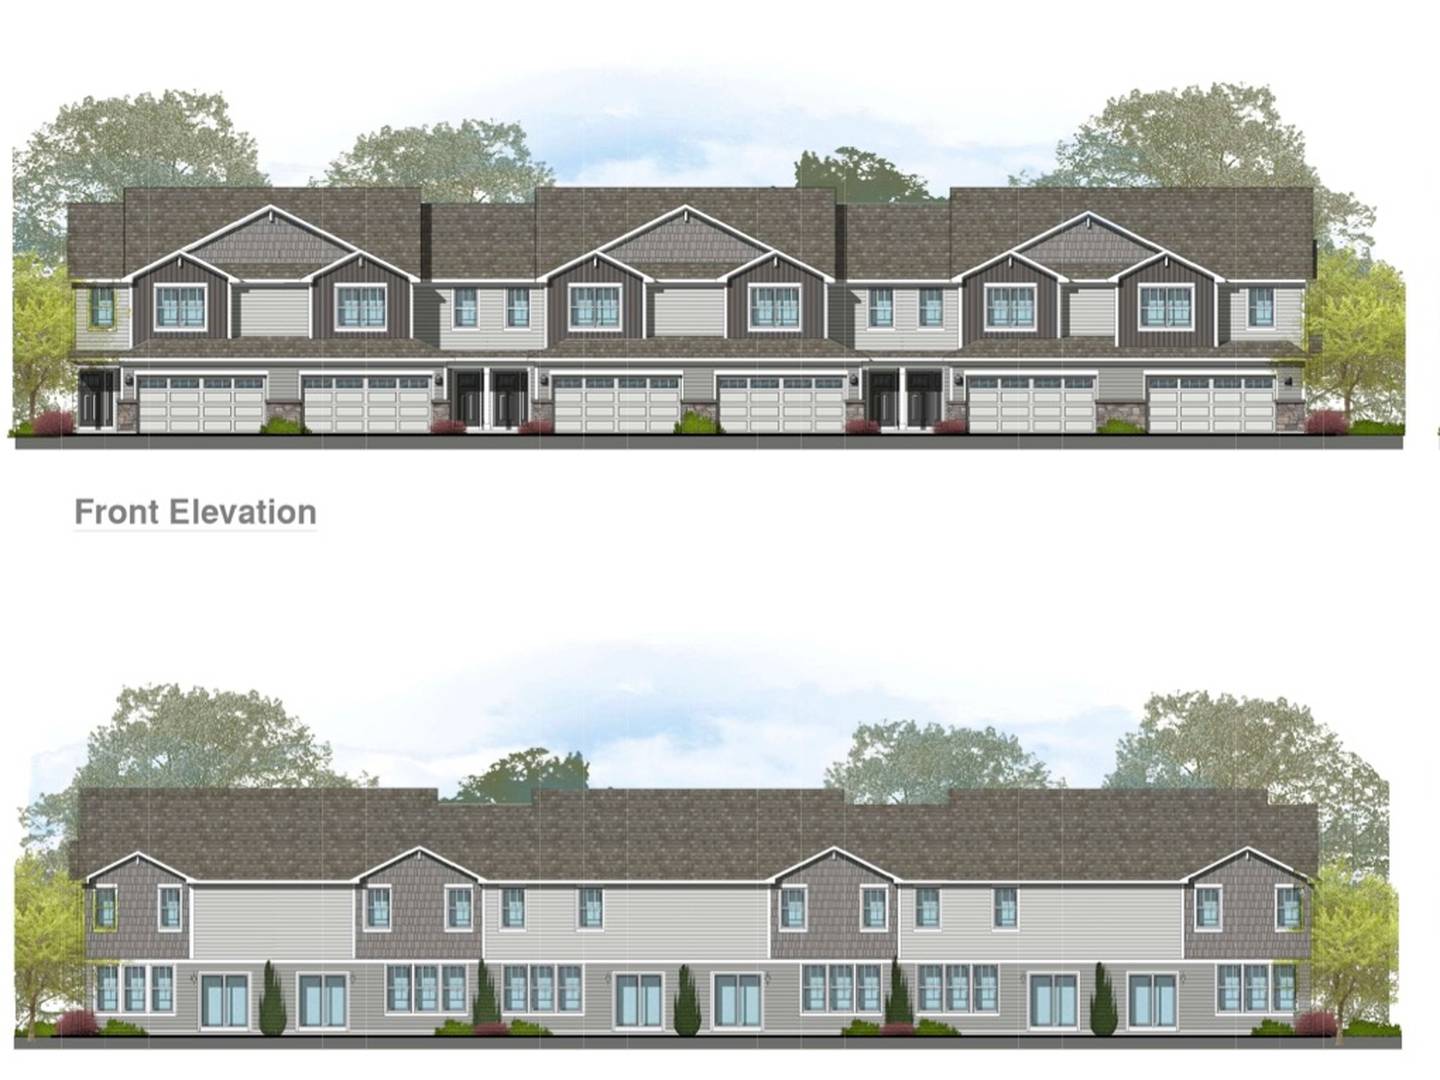 Developer Lennar Homes showed preliminary renderings, including elevations, for an unnamed 47-unit townhome project proposal on Jan. 18, 2023, before the Crystal Lake Planning and Zoning Commission. The proposal features a large amount of green space and would serve as a southern entryway to the Woodlore Estates neighborhood.